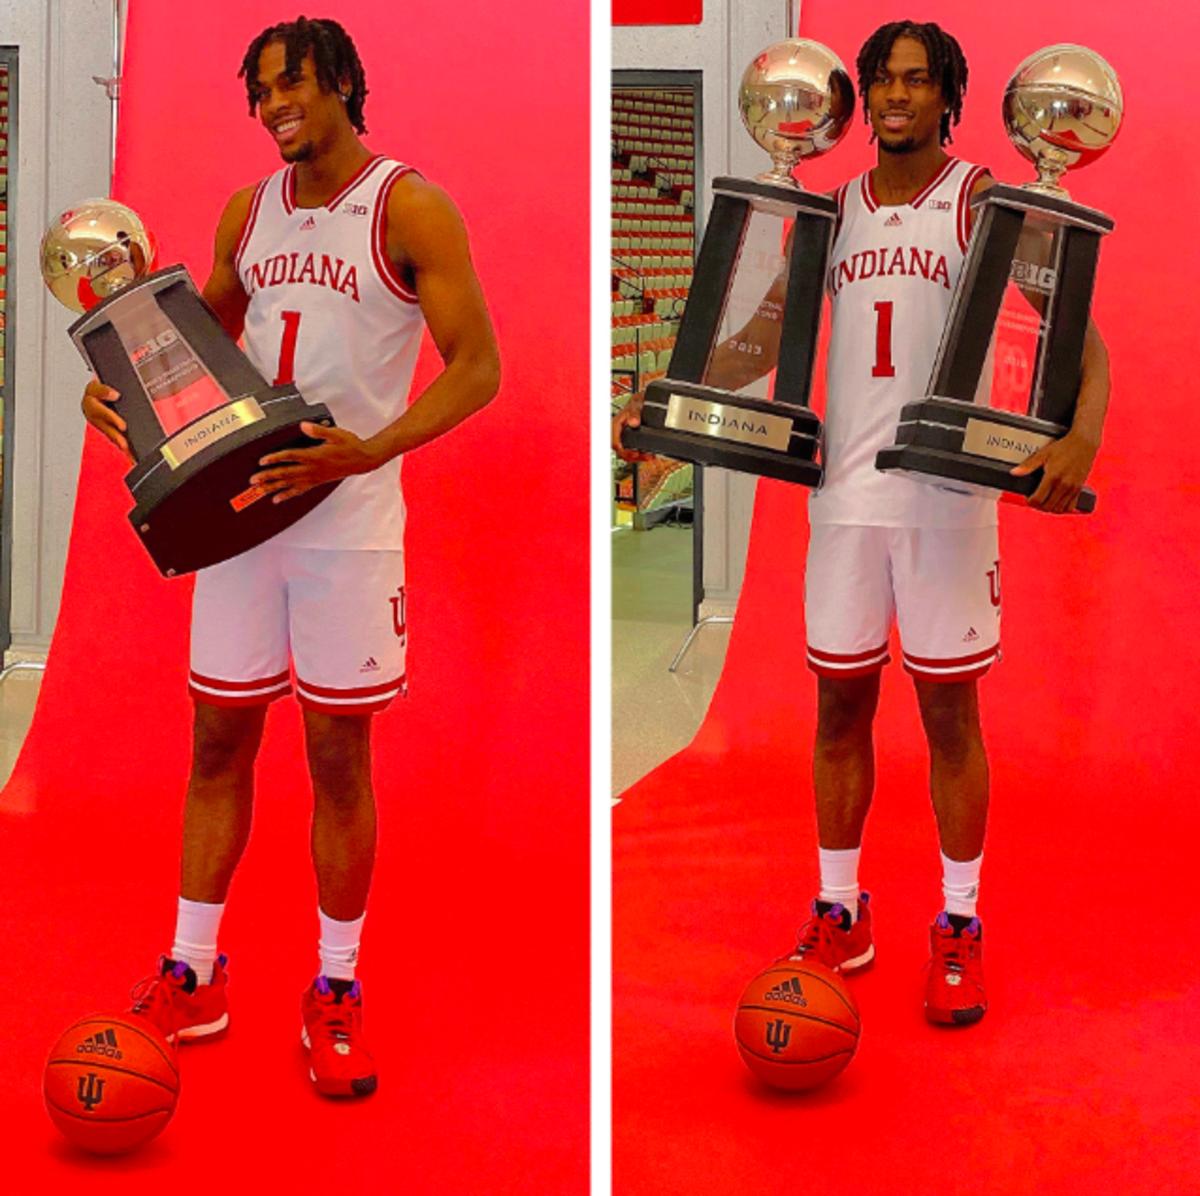 Mackenzie Mgbako poses with Big Ten championship trophies during his visit to Indiana. 